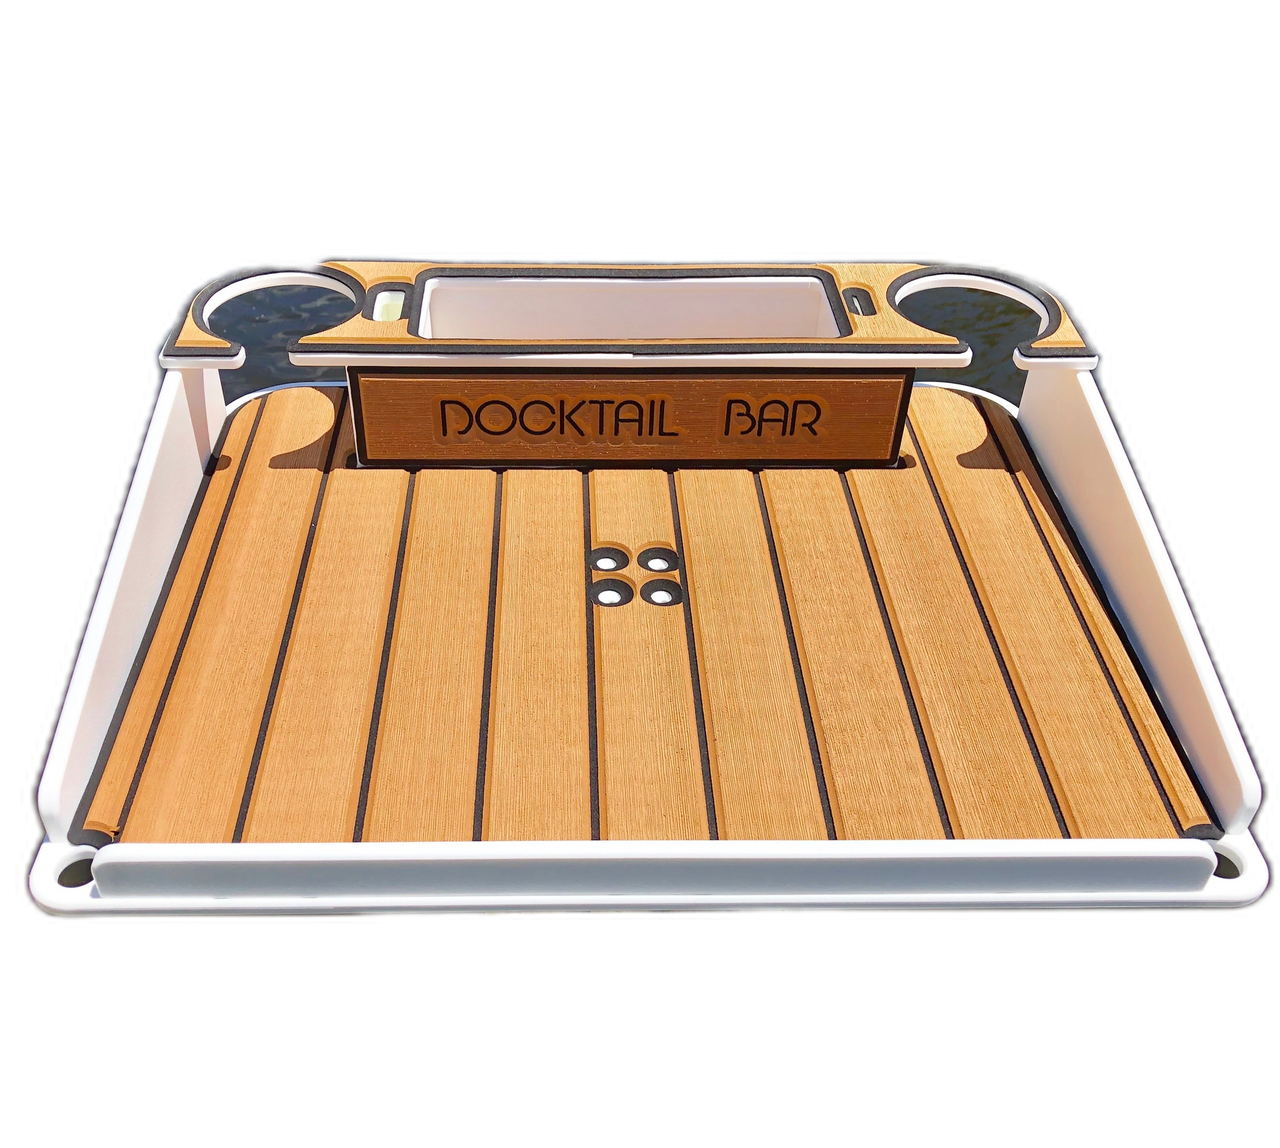 Marine Decking Accessory Kit for the Docktail Utility Table - Does NOT Include Table or Mount